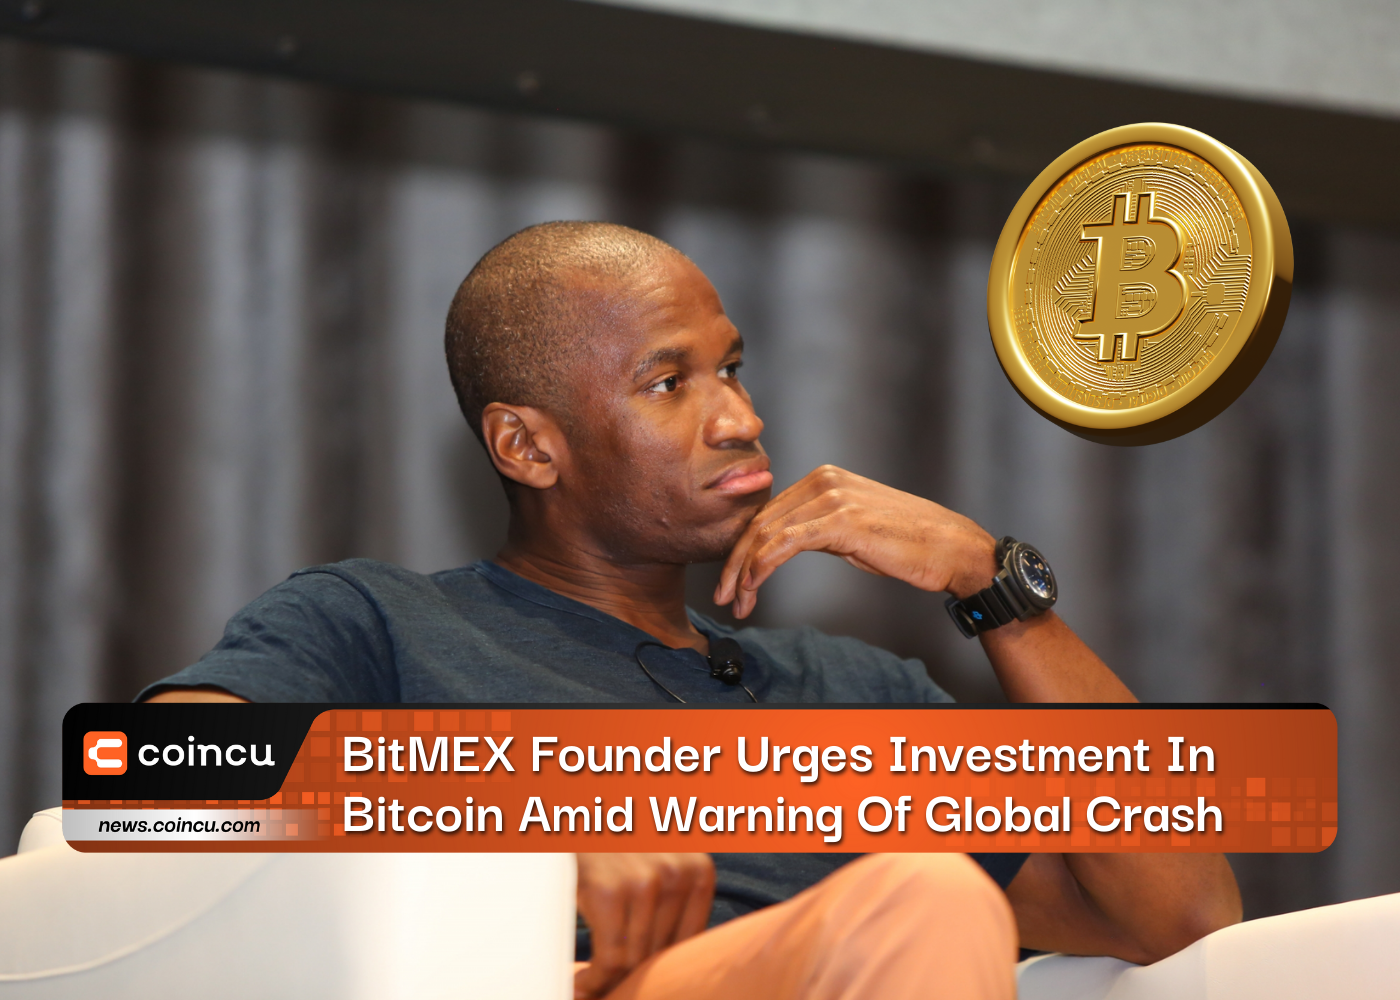 BitMEX Founder Urges Investment In Bitcoin Amid Warning Of Global Crash